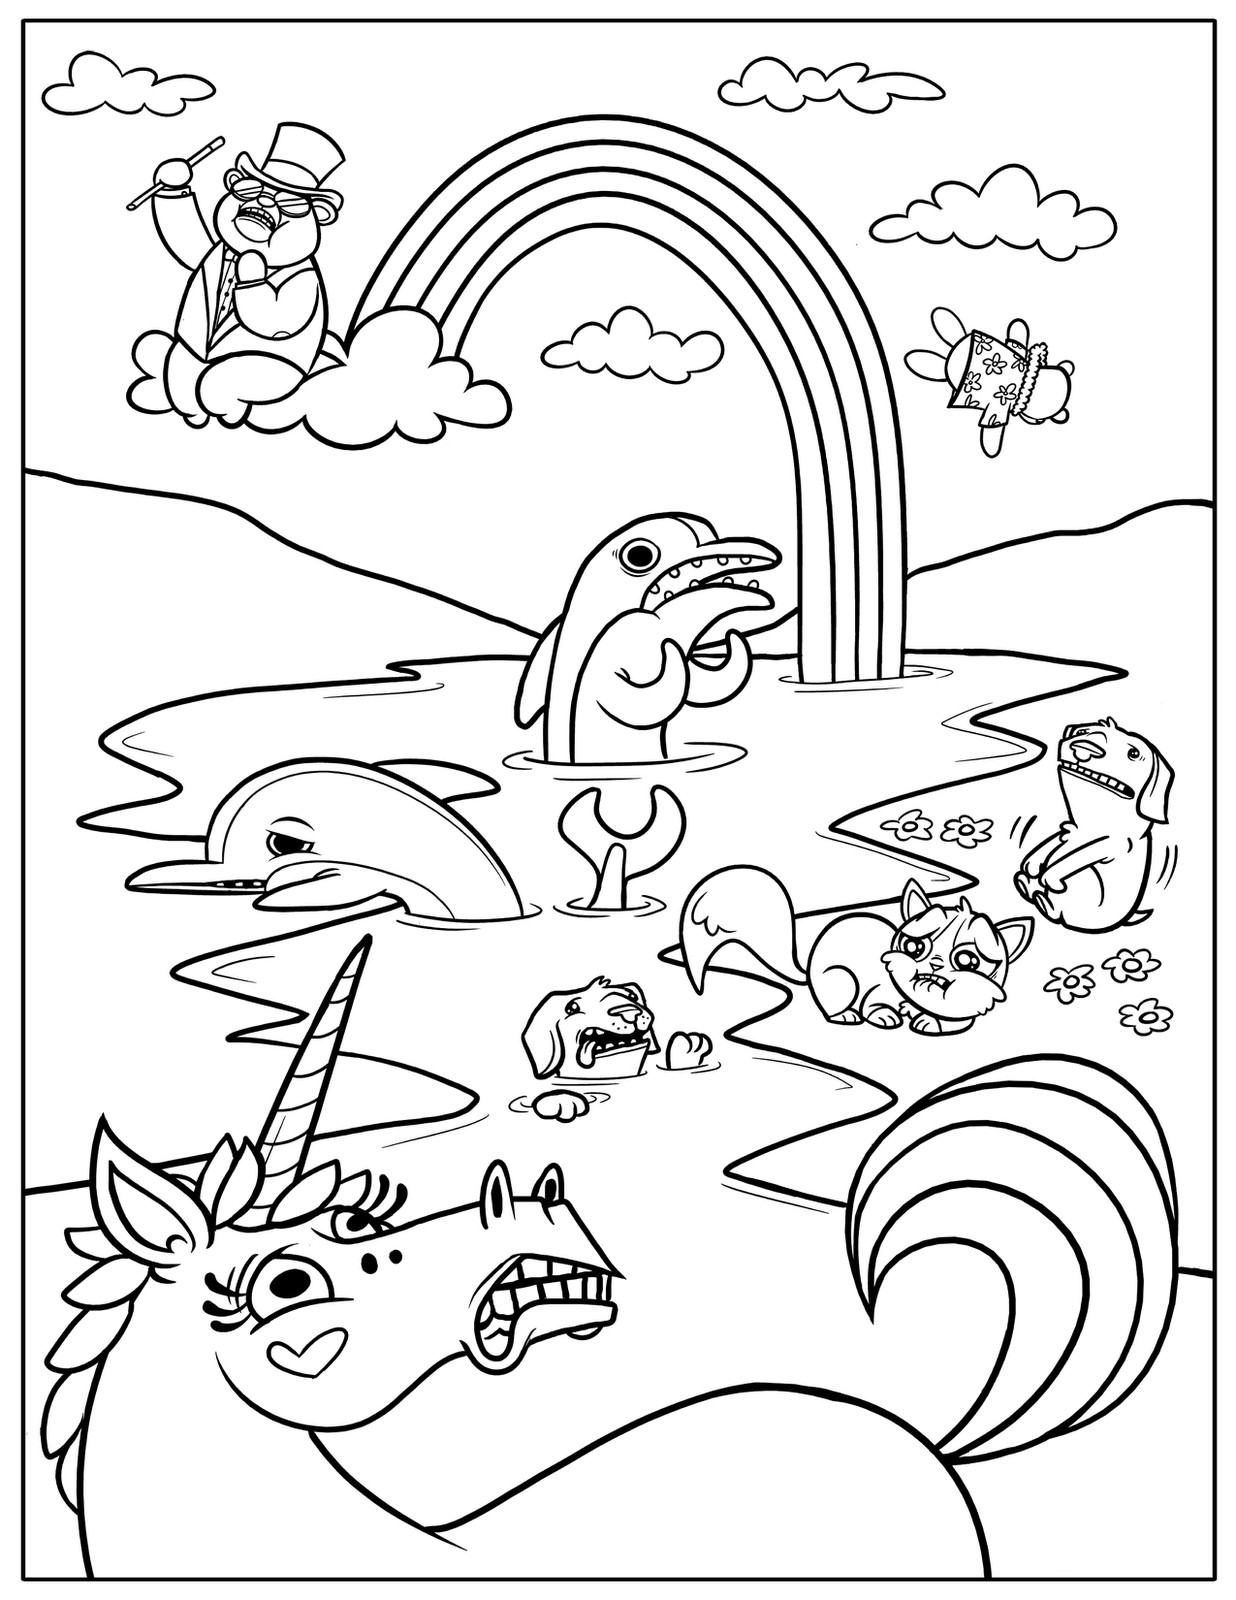 Kids On Line Coloring Pages
 Free Printable Rainbow Coloring Pages For Kids